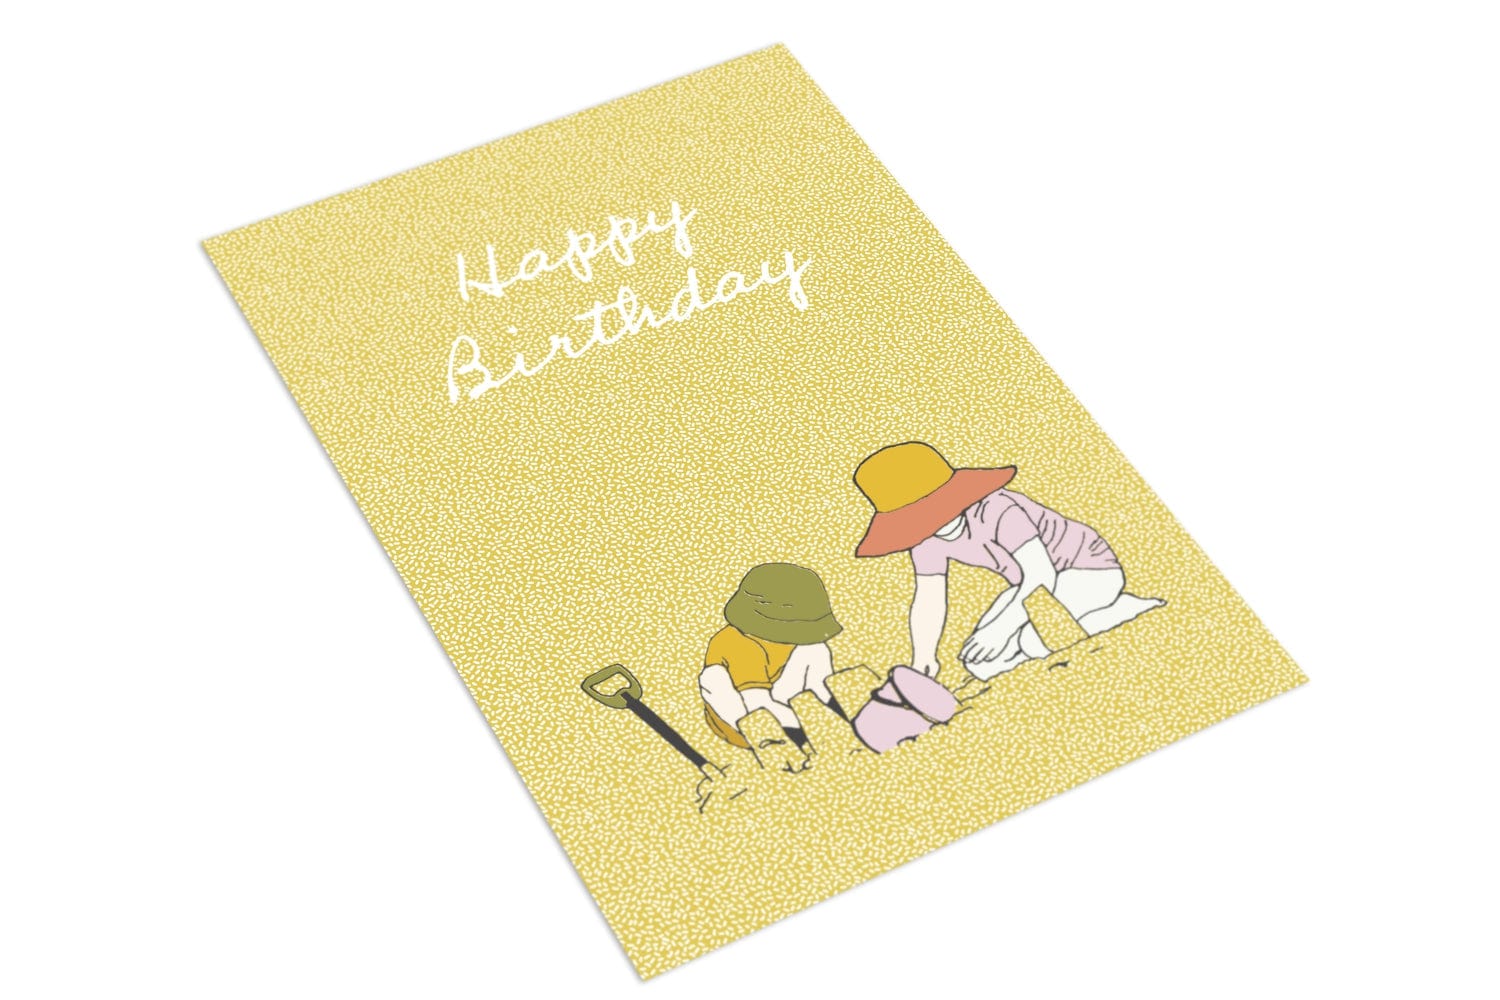 Happy Birthday Beach - The Paper People Greeting Cards